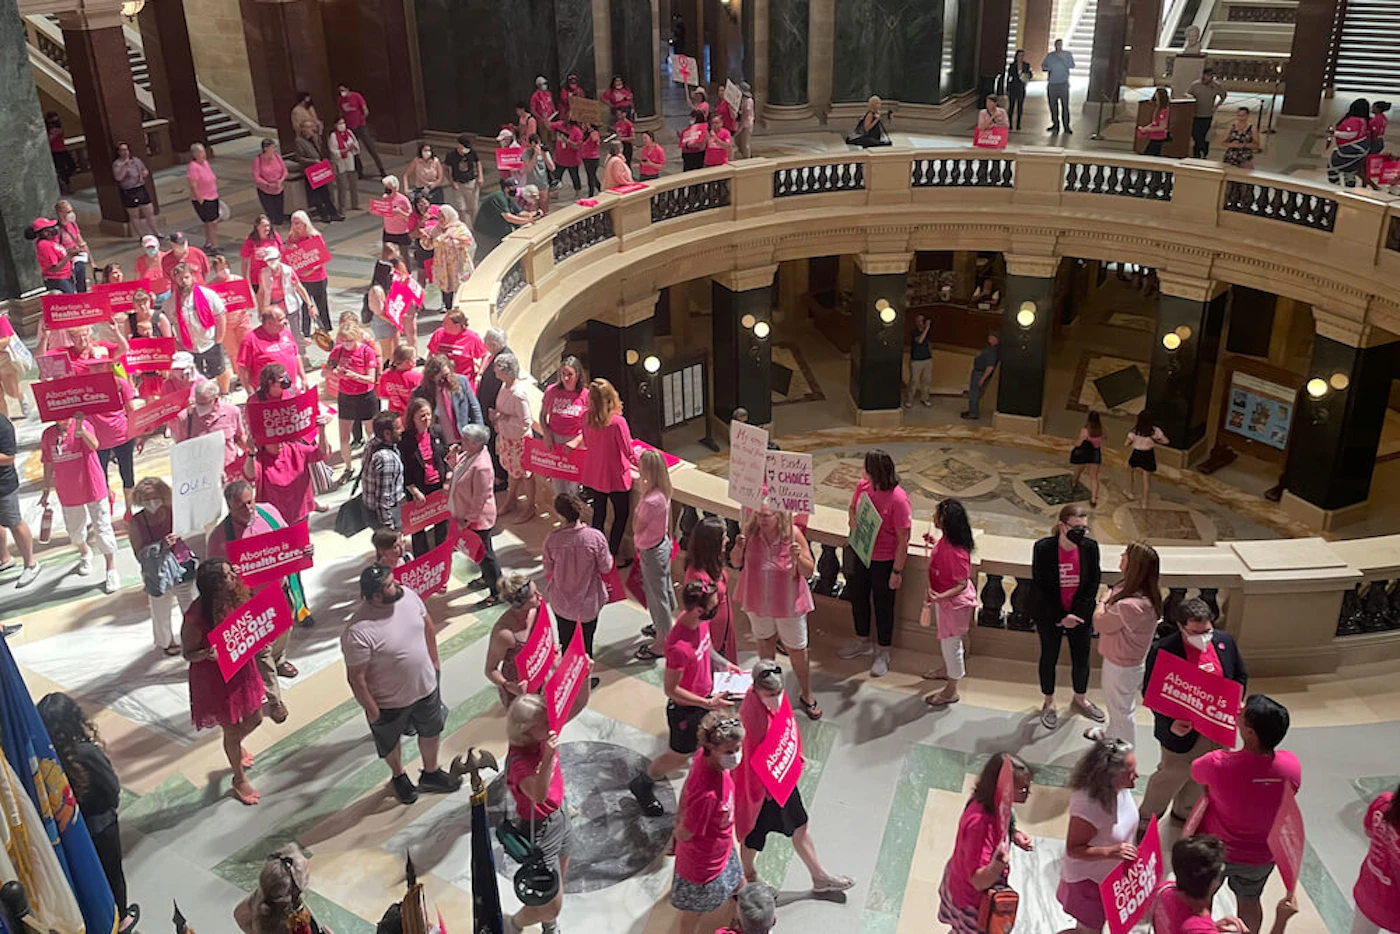 Abortion rights supporters gather for a "pink out" protest organized by Planned Parenthood in the rotunda of the state Capitol Wednesday, June 22, 2022, in Madison, Wis. (AP Photo/Harm Venhuizen)